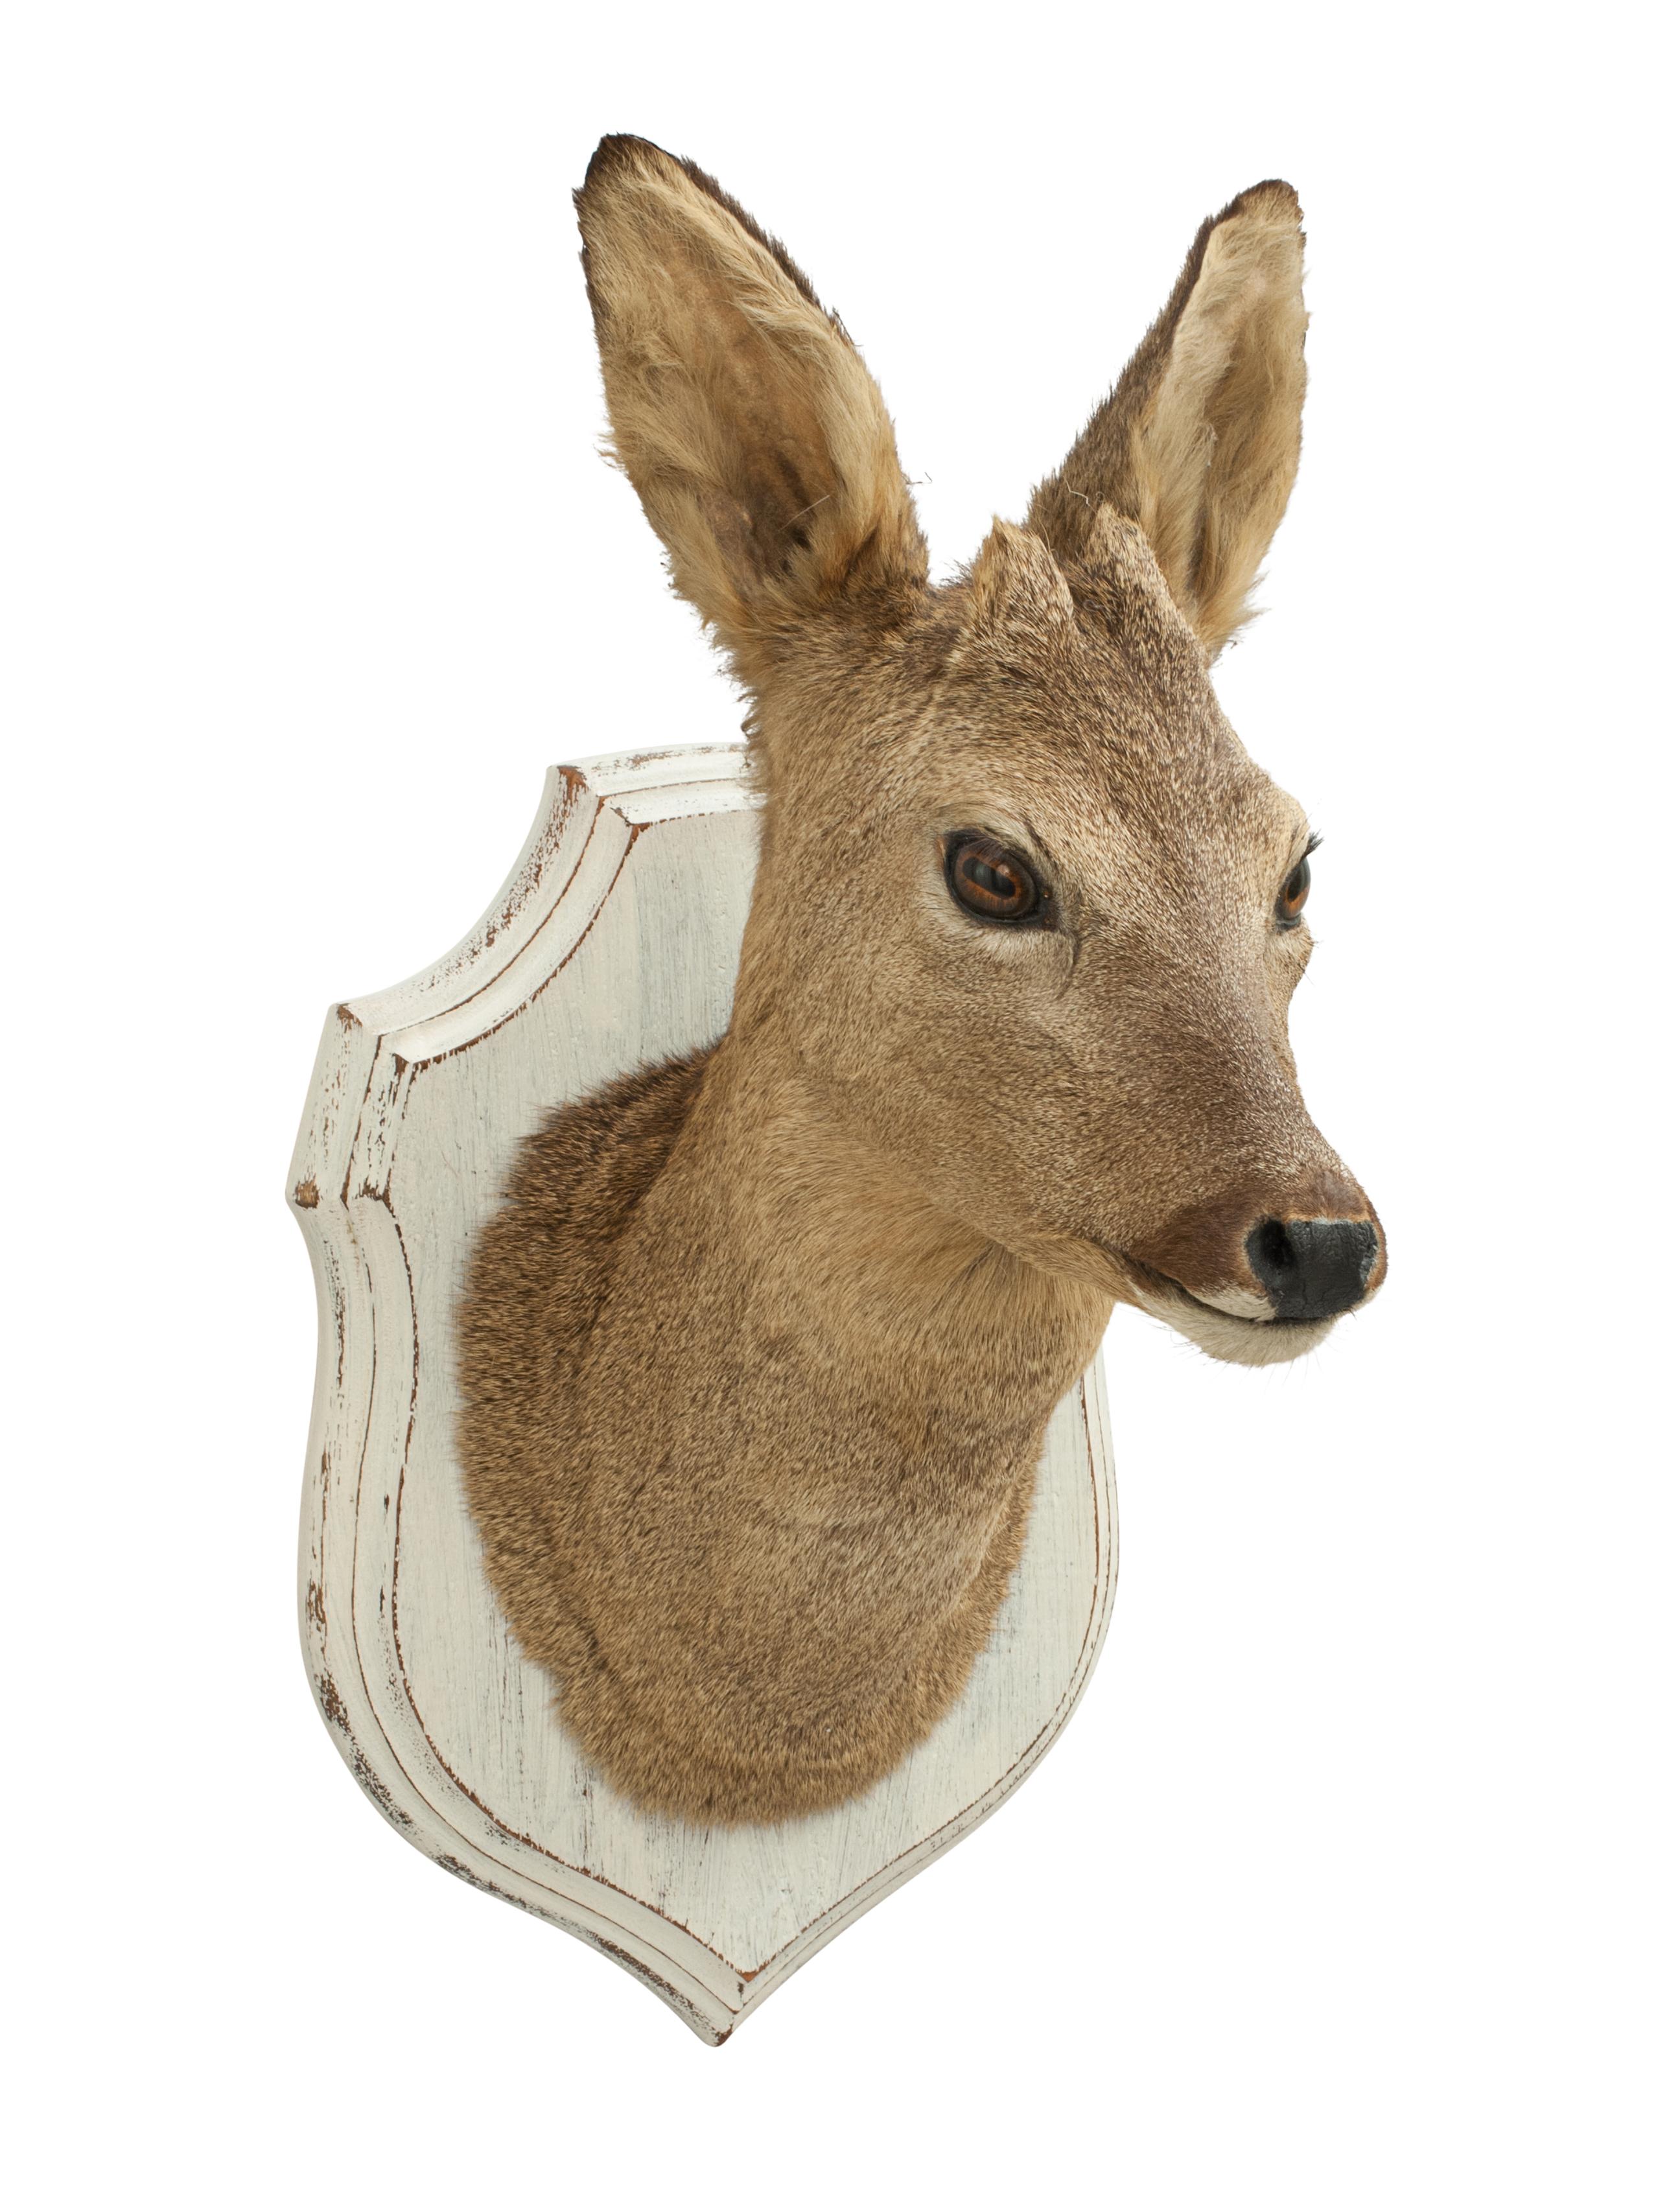 Vintage taxidermy, Roe deer trophy shoulder mount.
A nice modern hunting trophy, a prepared Roebuck shoulder mount. The Roe deer (Capreolus capreolus) head is with the start of growth of a pair of antlers and mounted onto a wooden shield. The deer